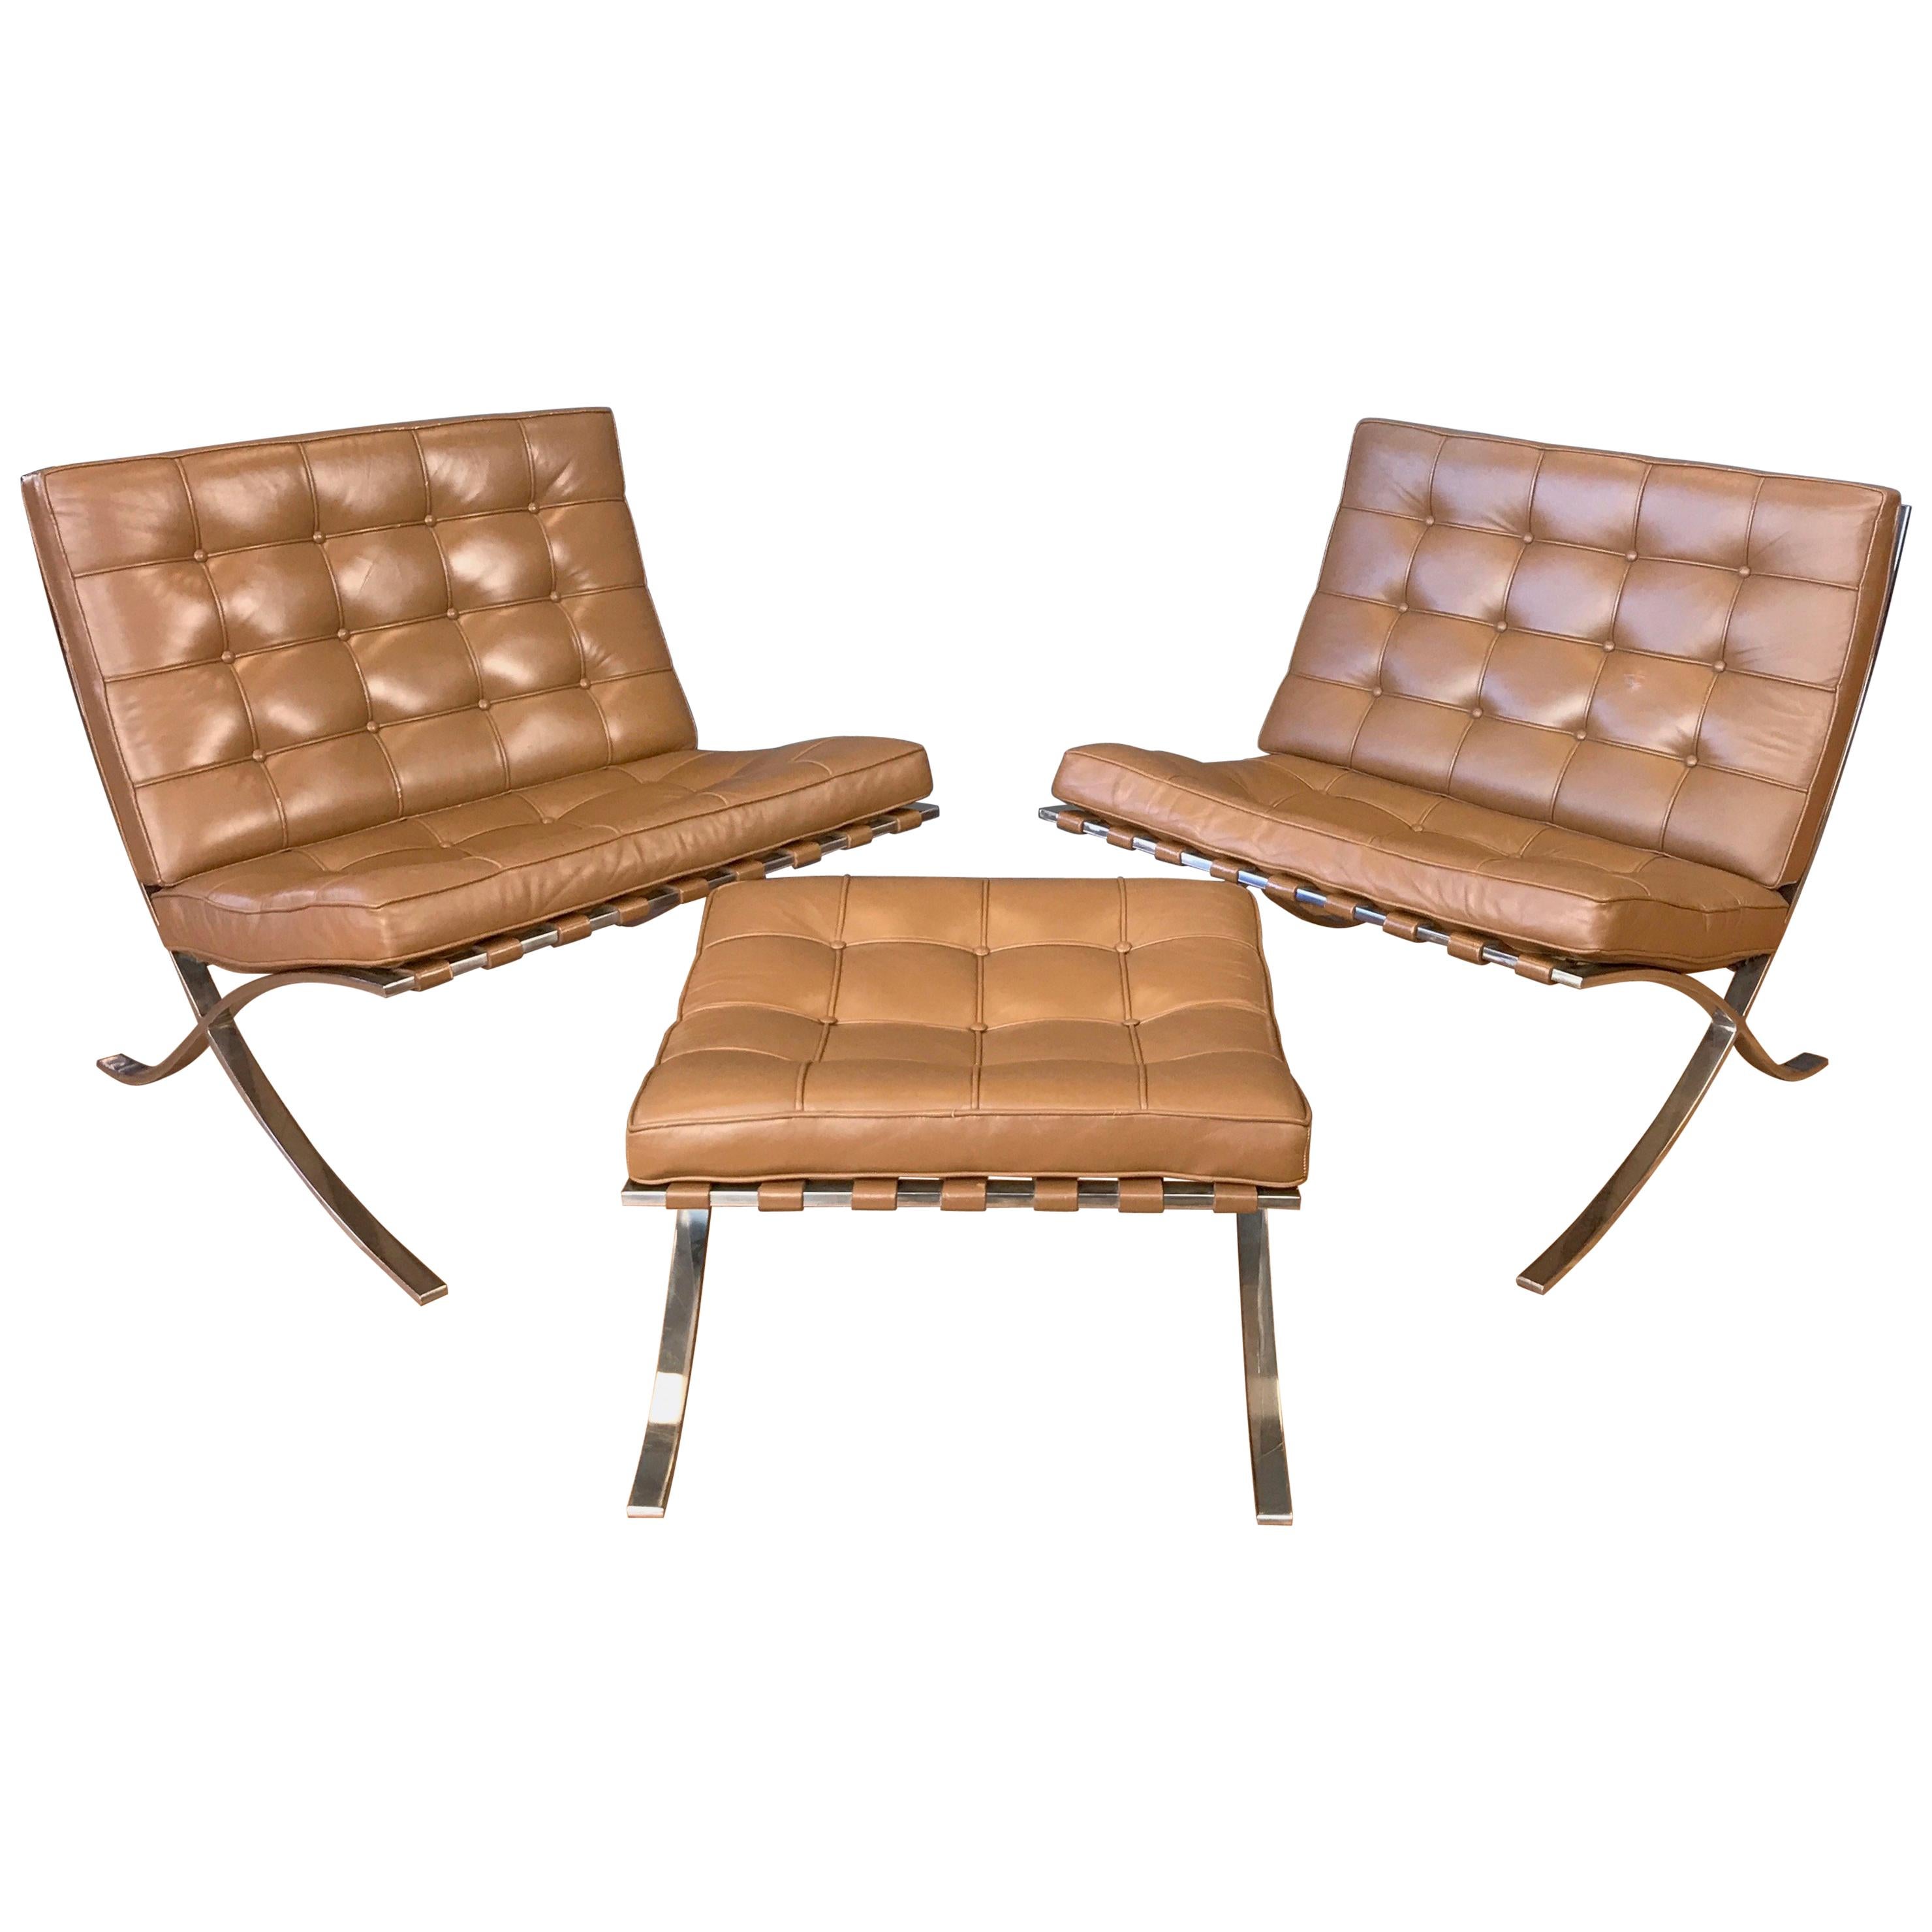 Vintage Mies van der Rohe for Knoll Barcelona Chairs and Ottoman Set